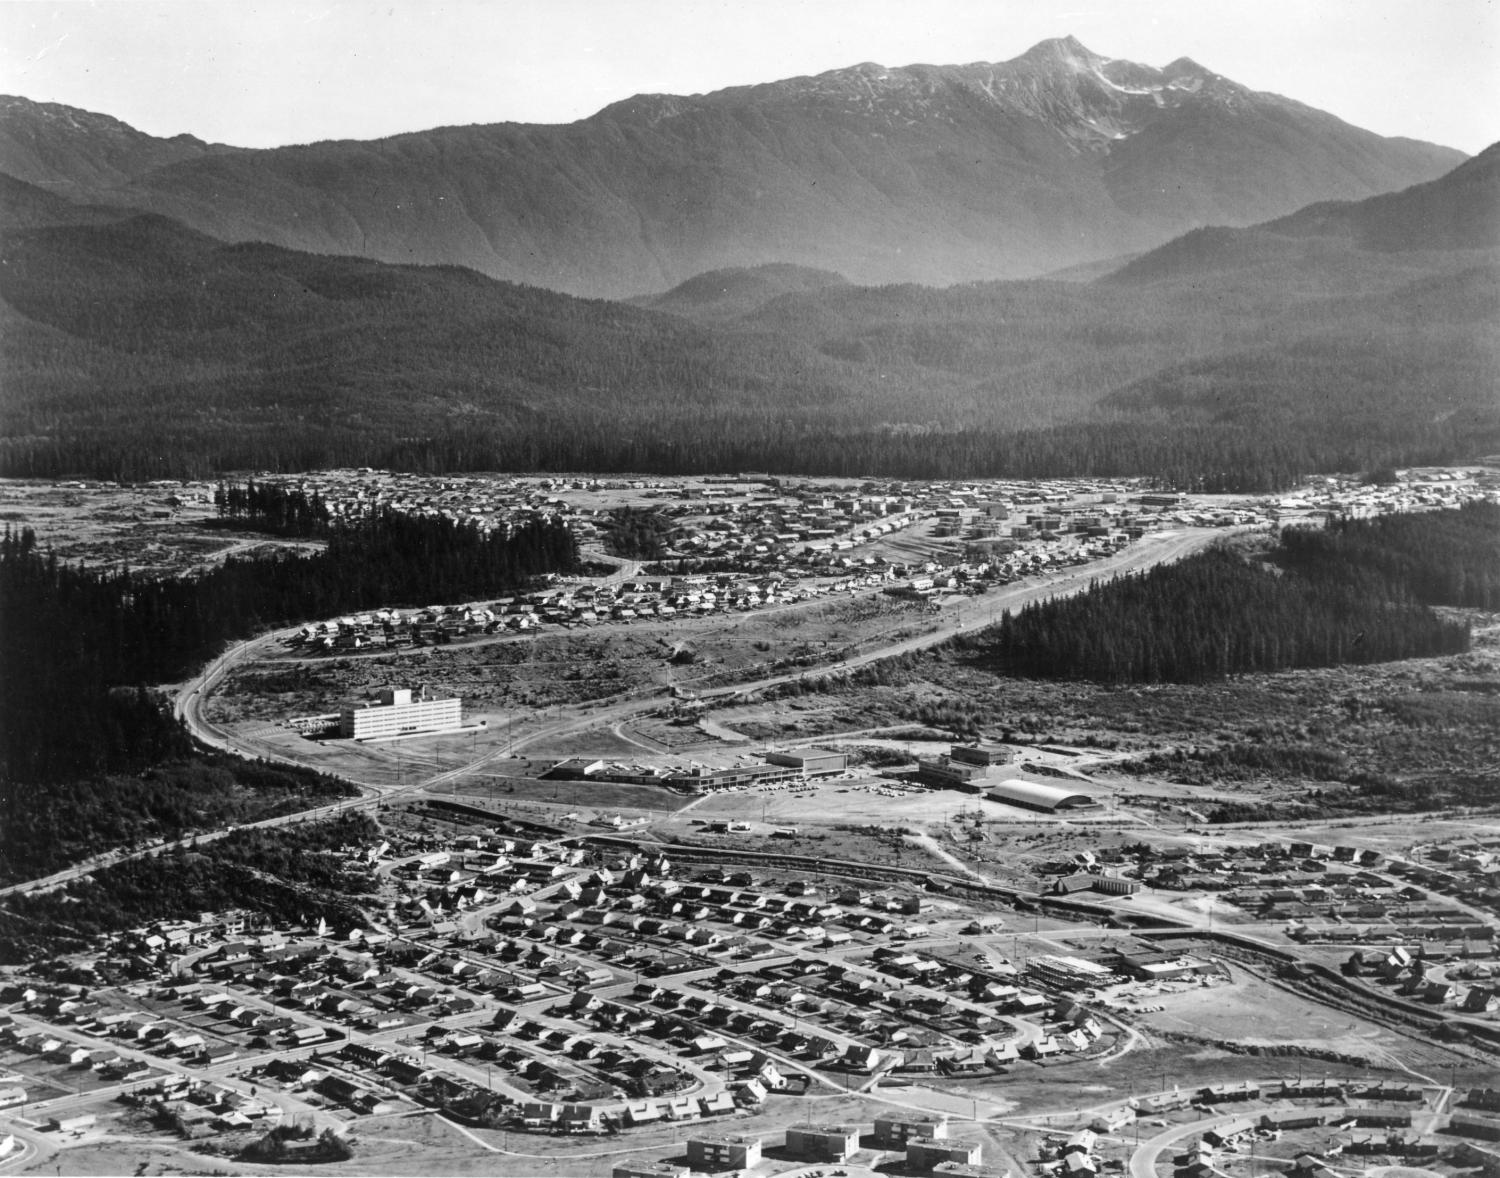 Telephoto depicts the town of Kitimat, an aerial view with Mount Elizabeth in the background, Kildala Neighbourhood in the foreground, and Nechako Neighbourhood.